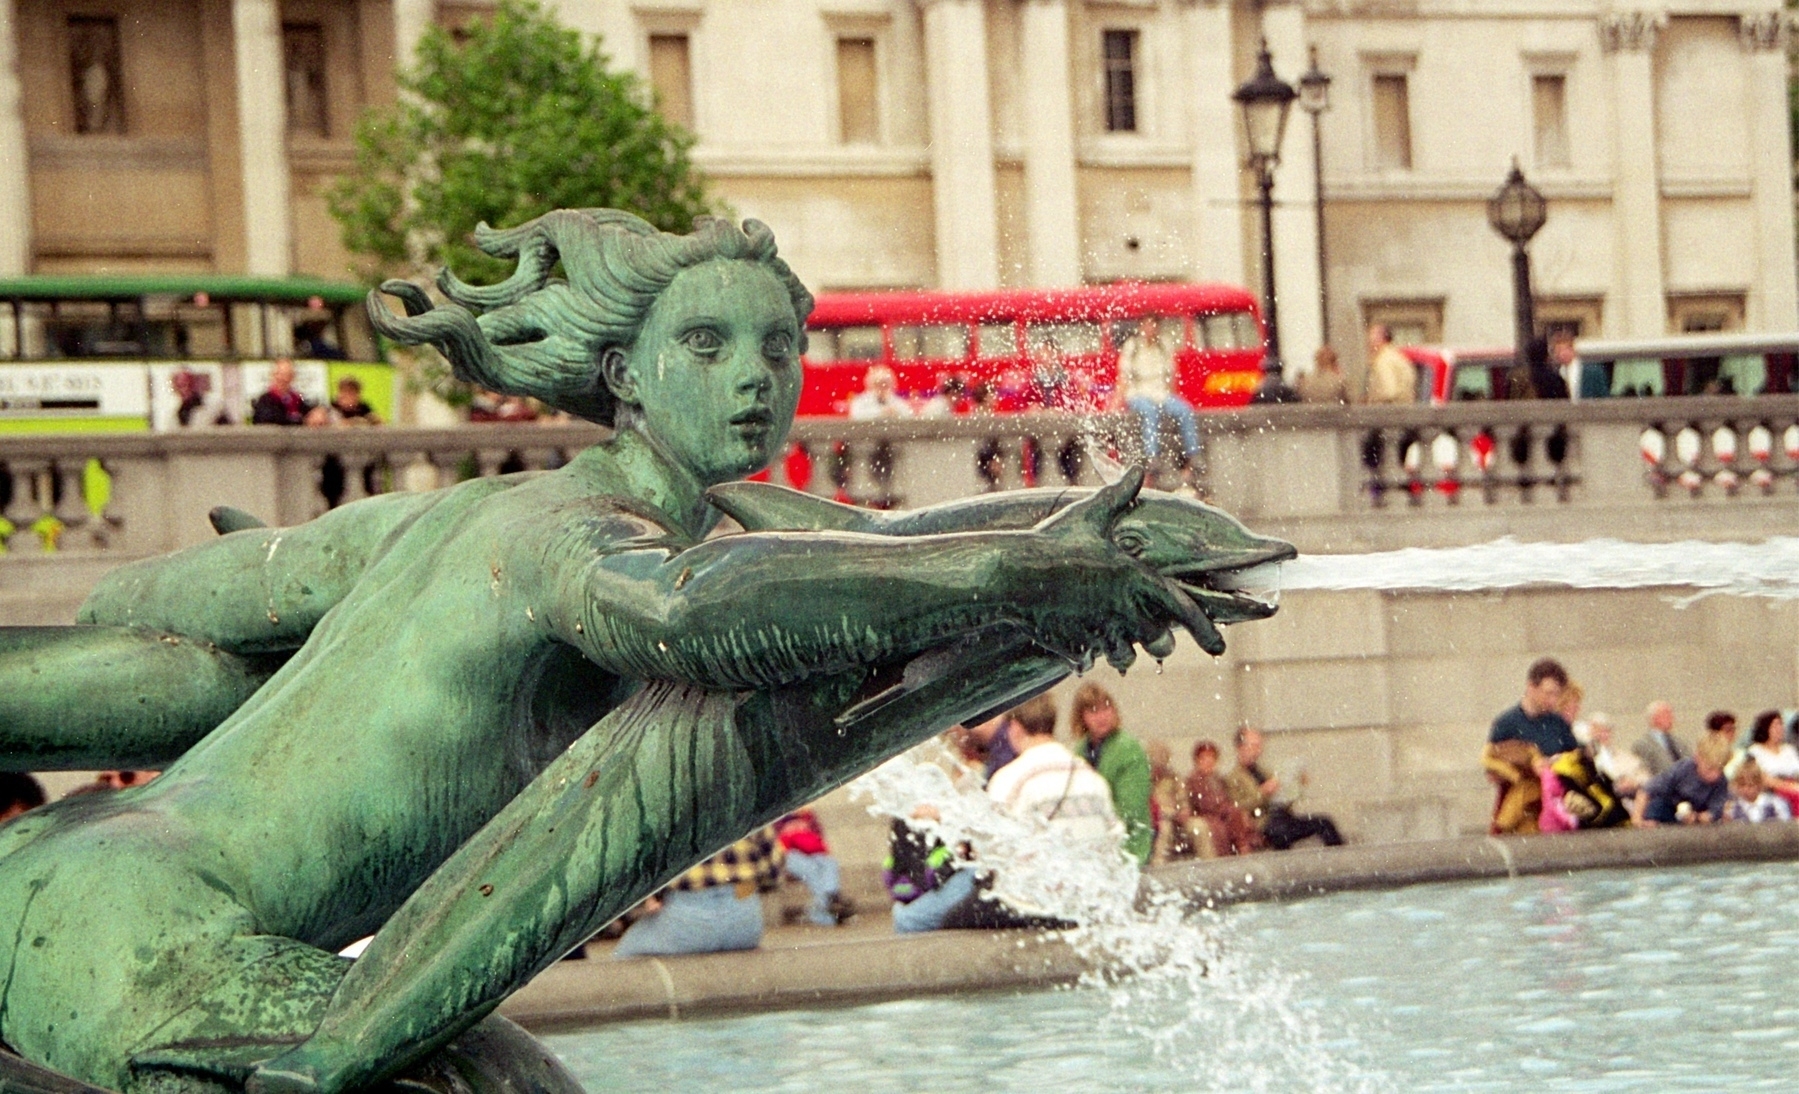 One of the fountains in Trafalgar Square in summer 1994.